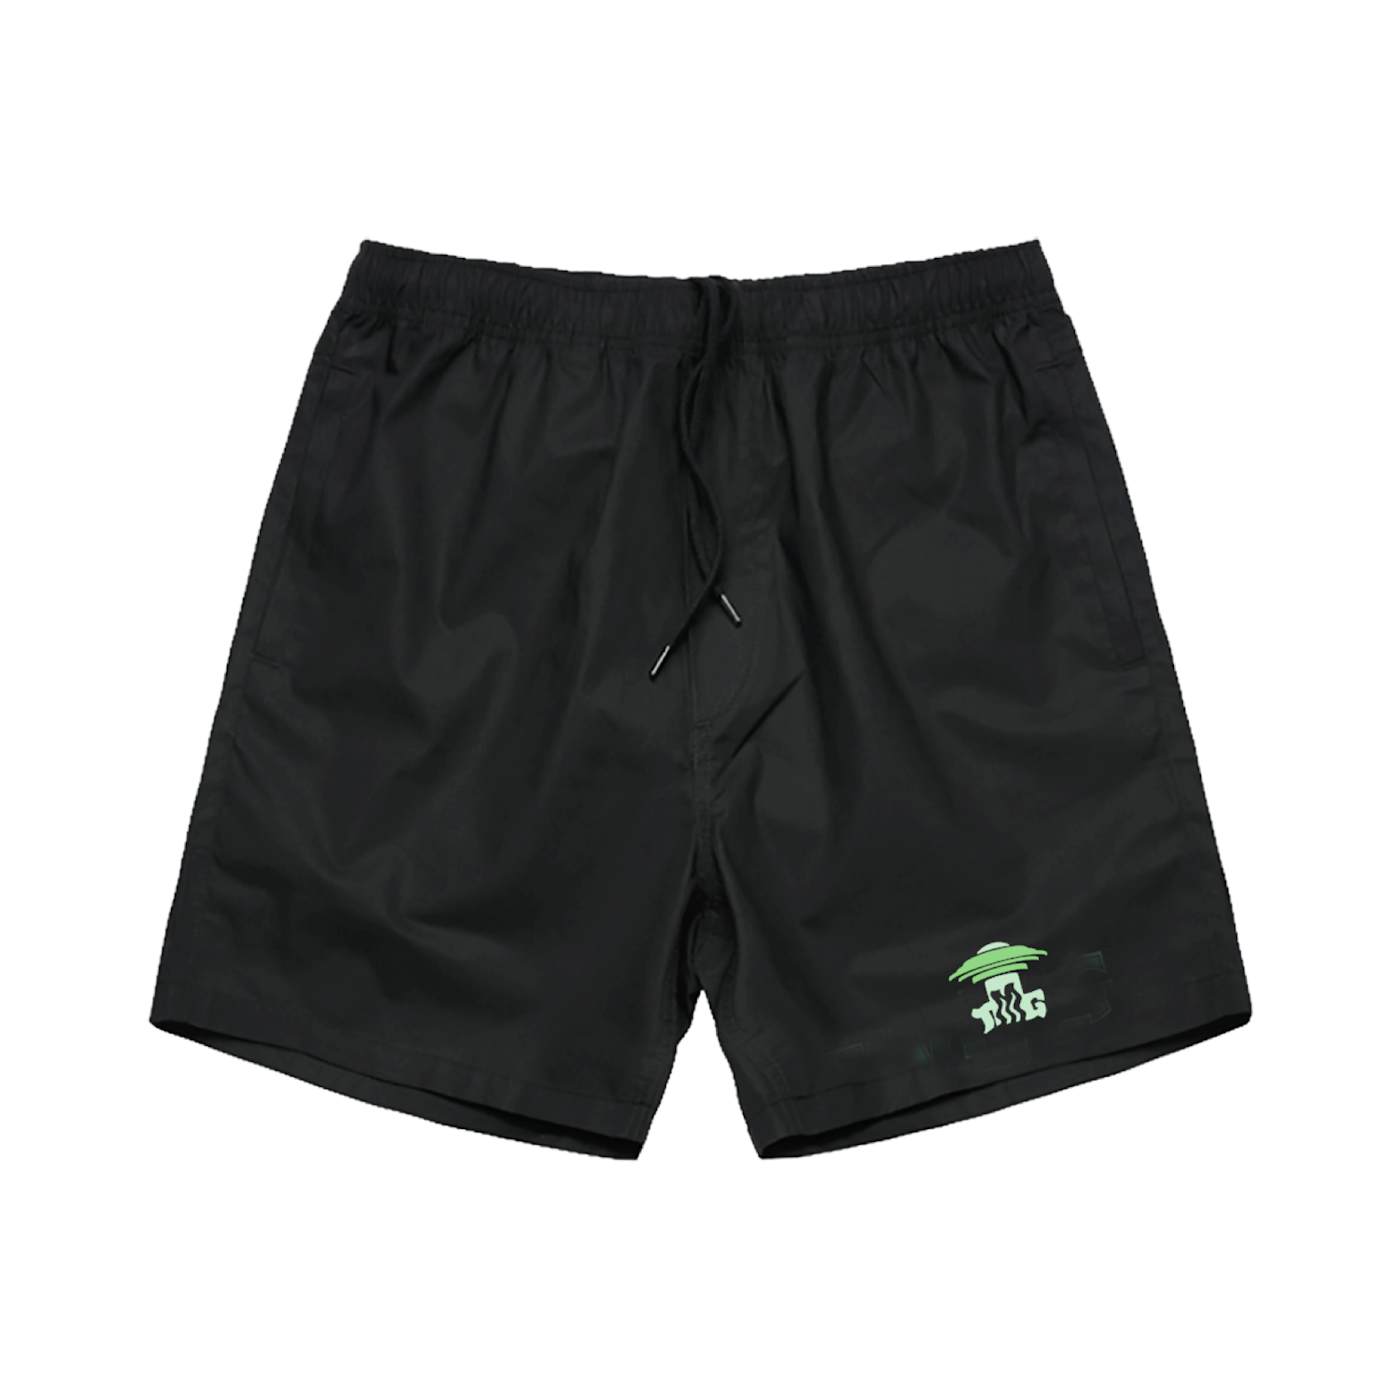 Tiny Meat Gang Abduction Black Beach Shorts